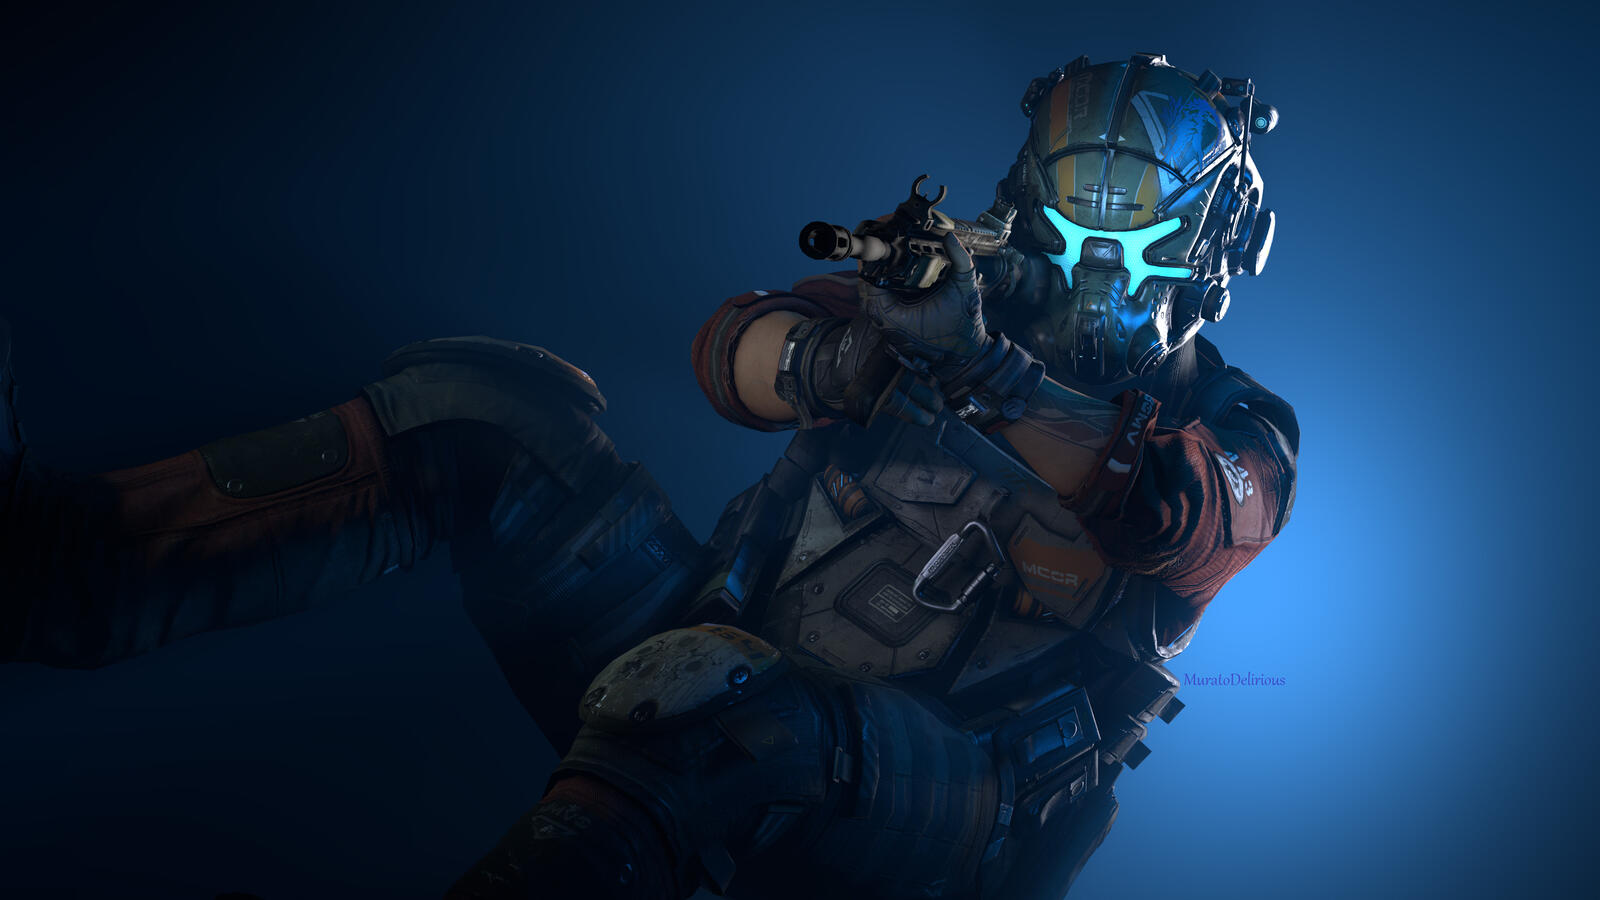 Wallpapers titanfall 2 games soldiers on the desktop